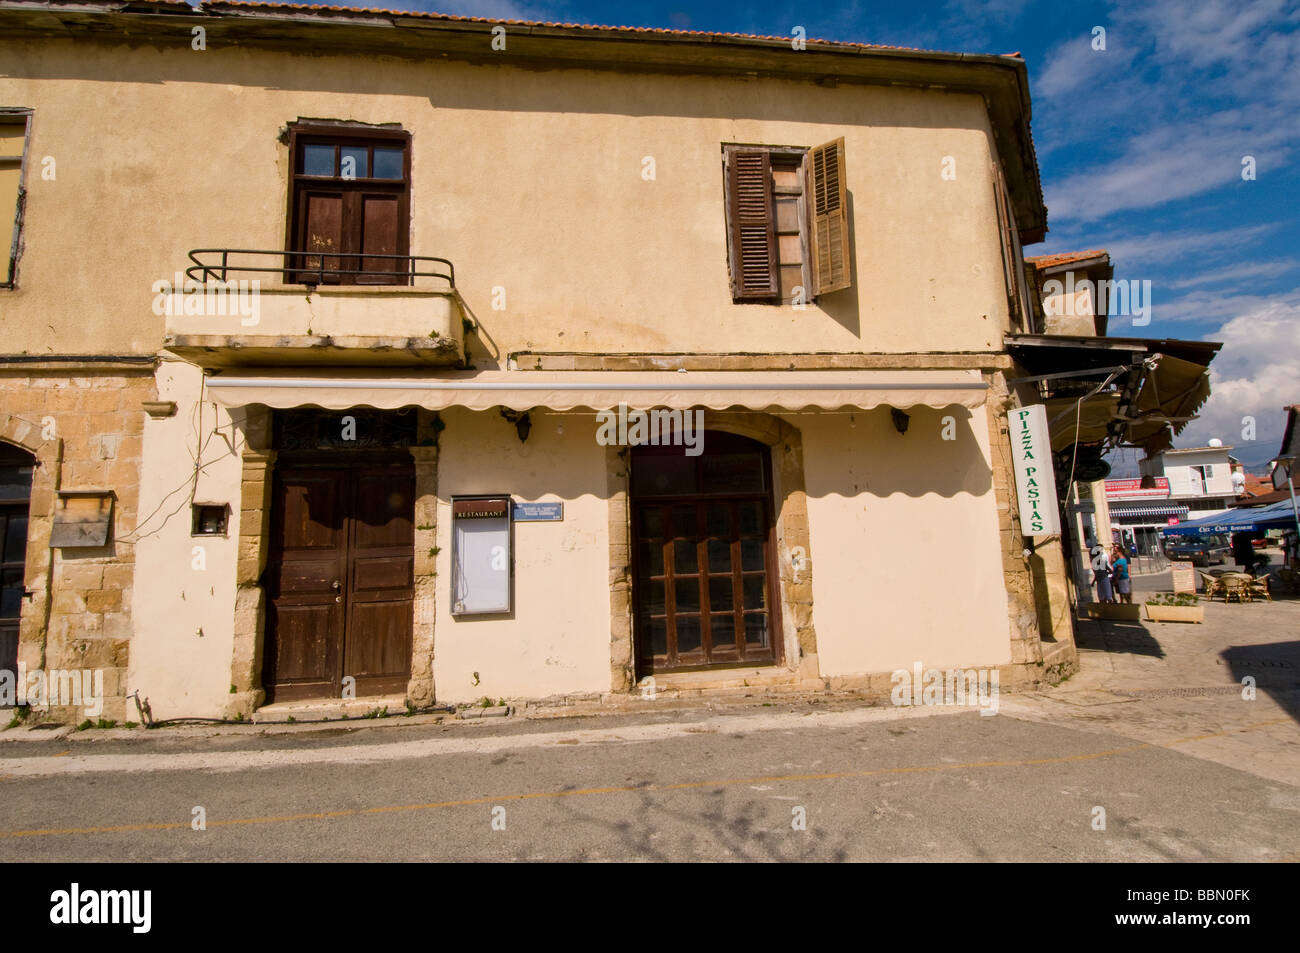 An old tavern in the town of Polis, Cyprus Stock Photo